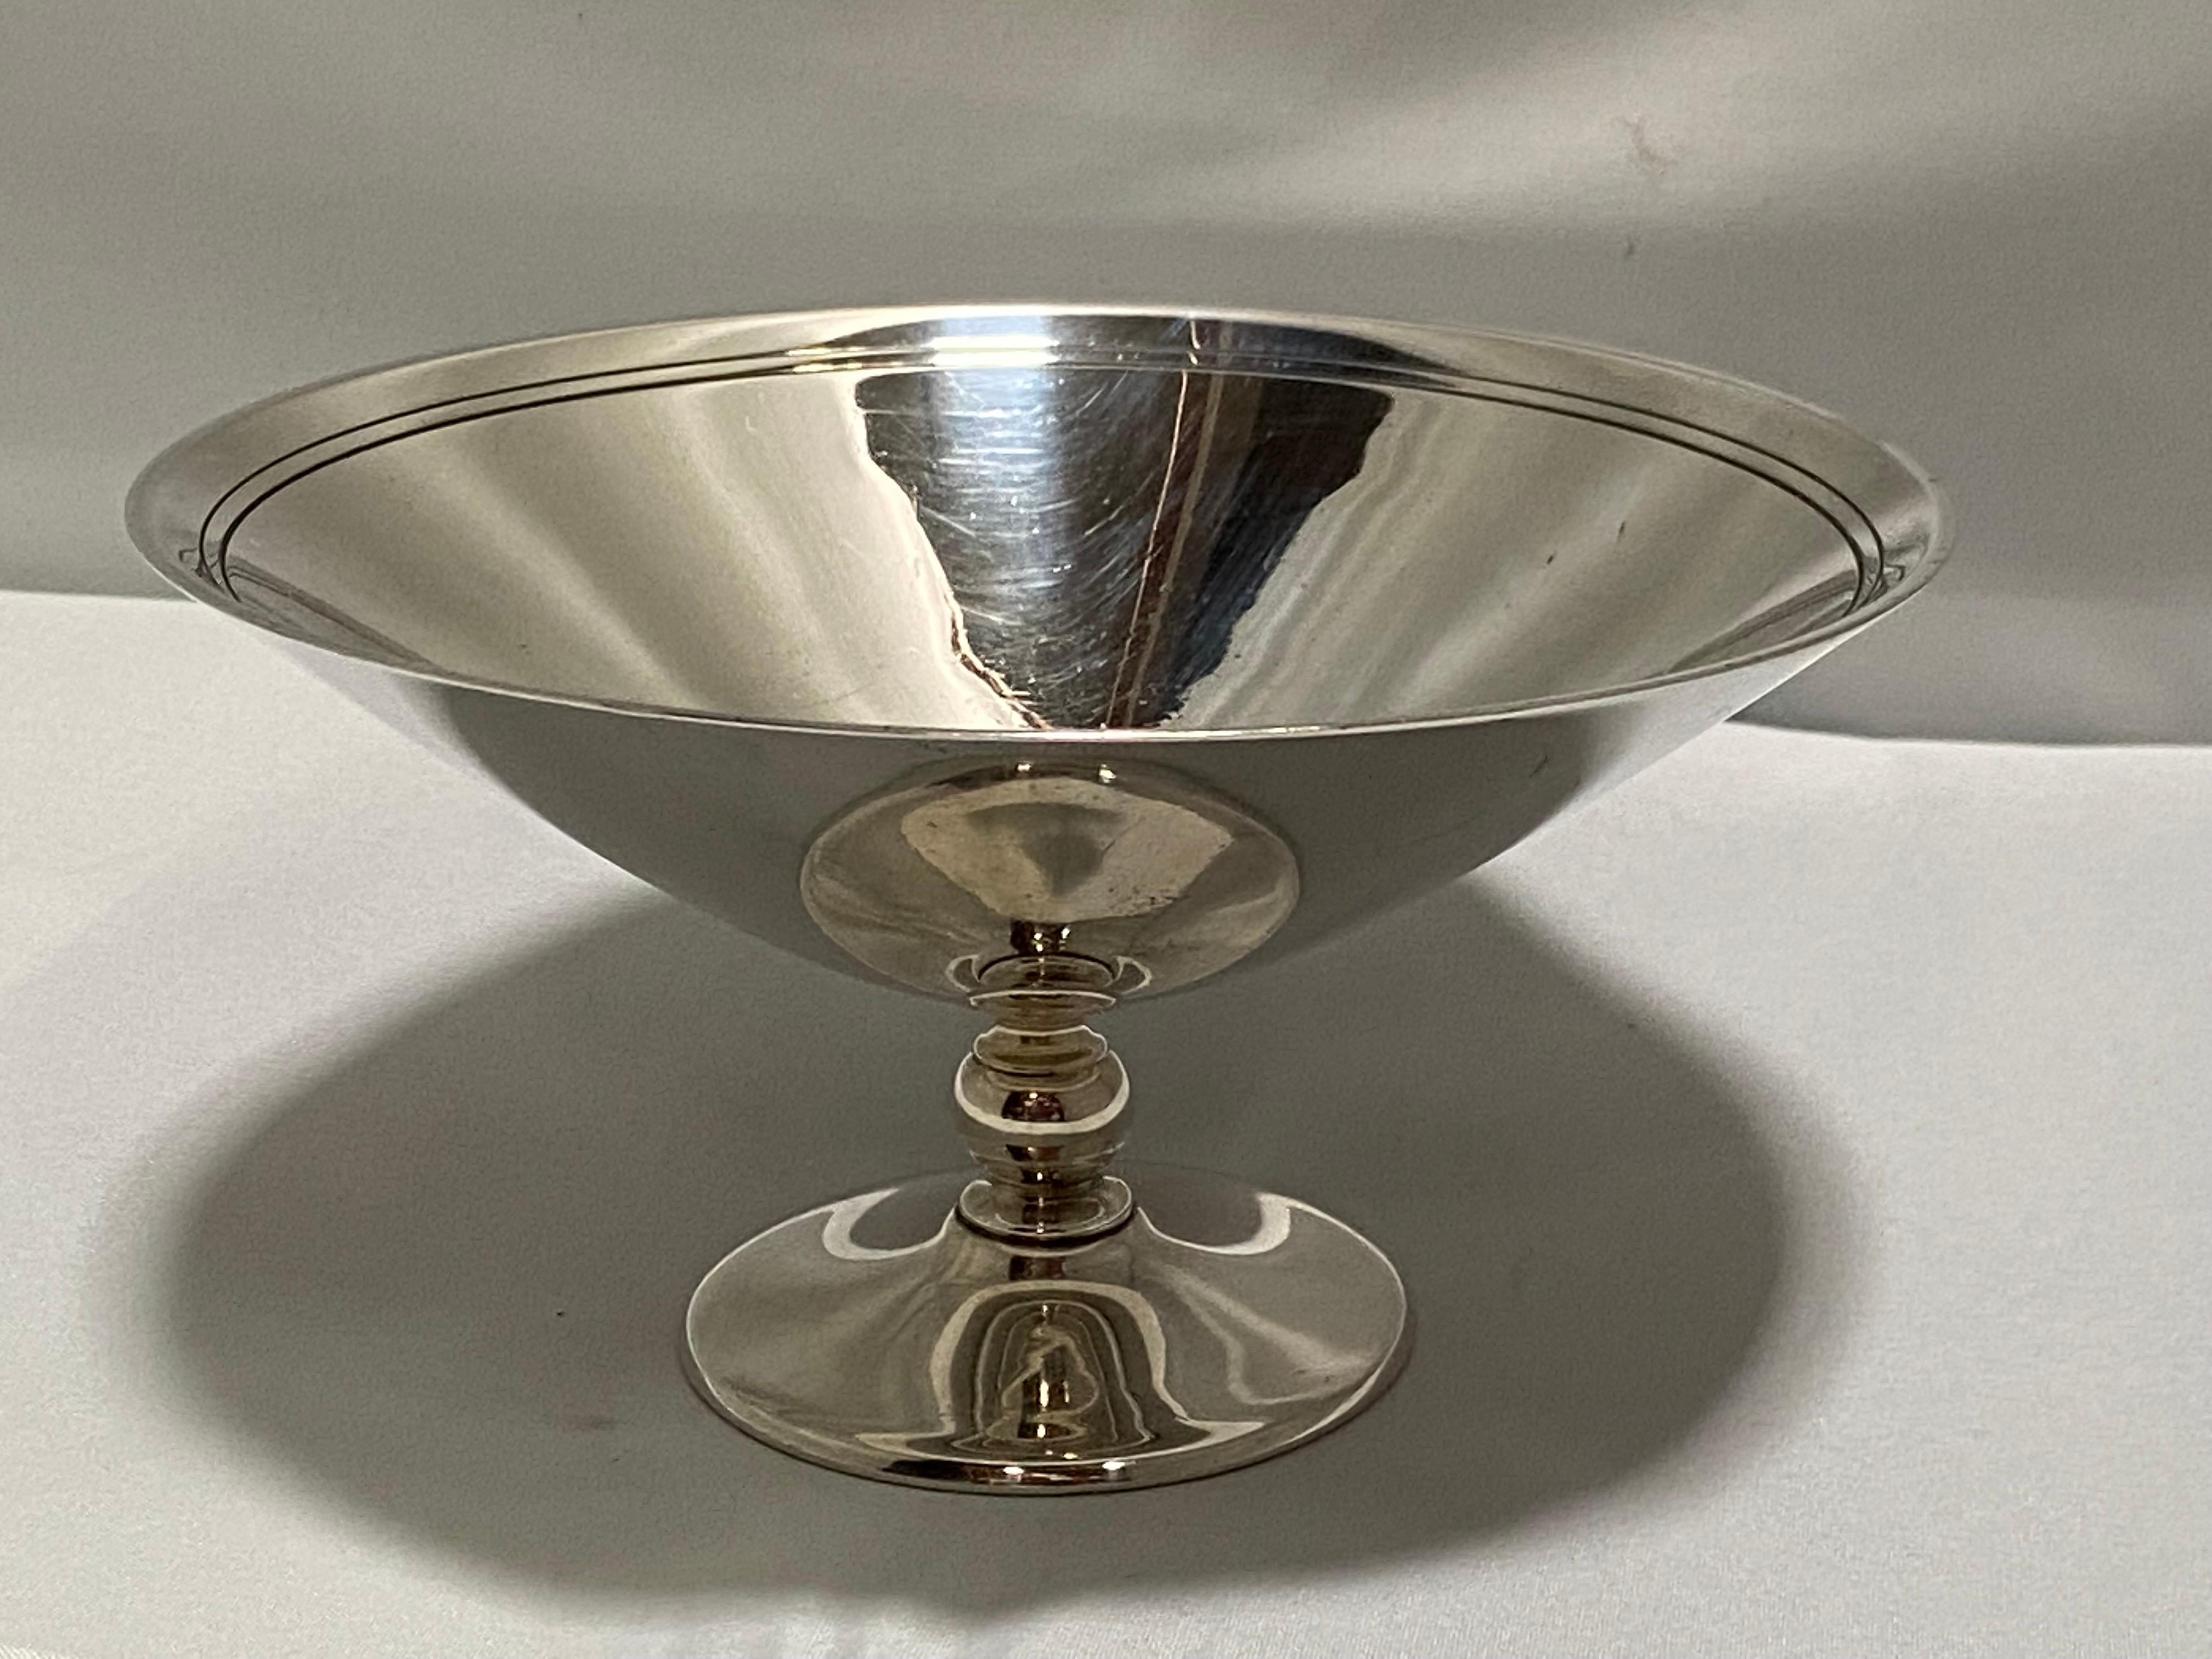 Tiffany and Company 1940's Sterling Silver Footed Bowl or Compote Dish For Sale 5